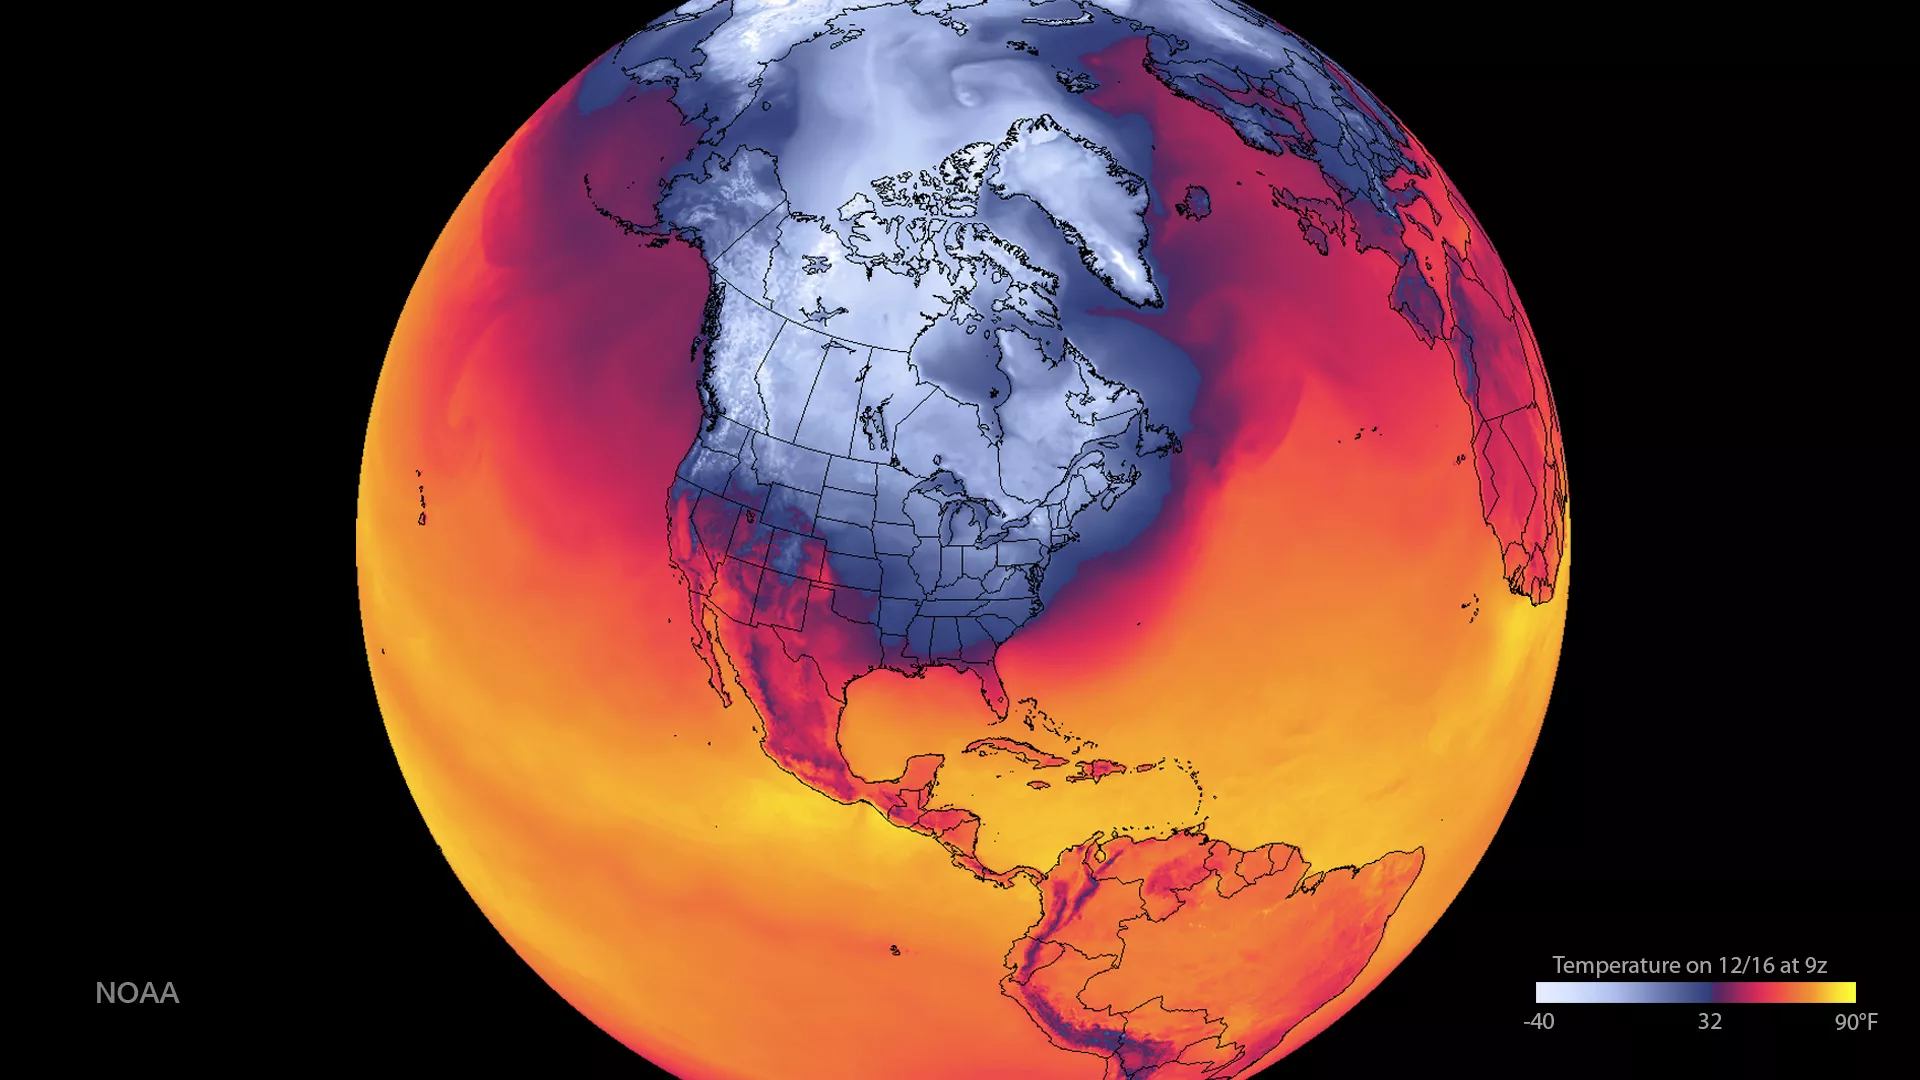 Image of surface temperatures across North America